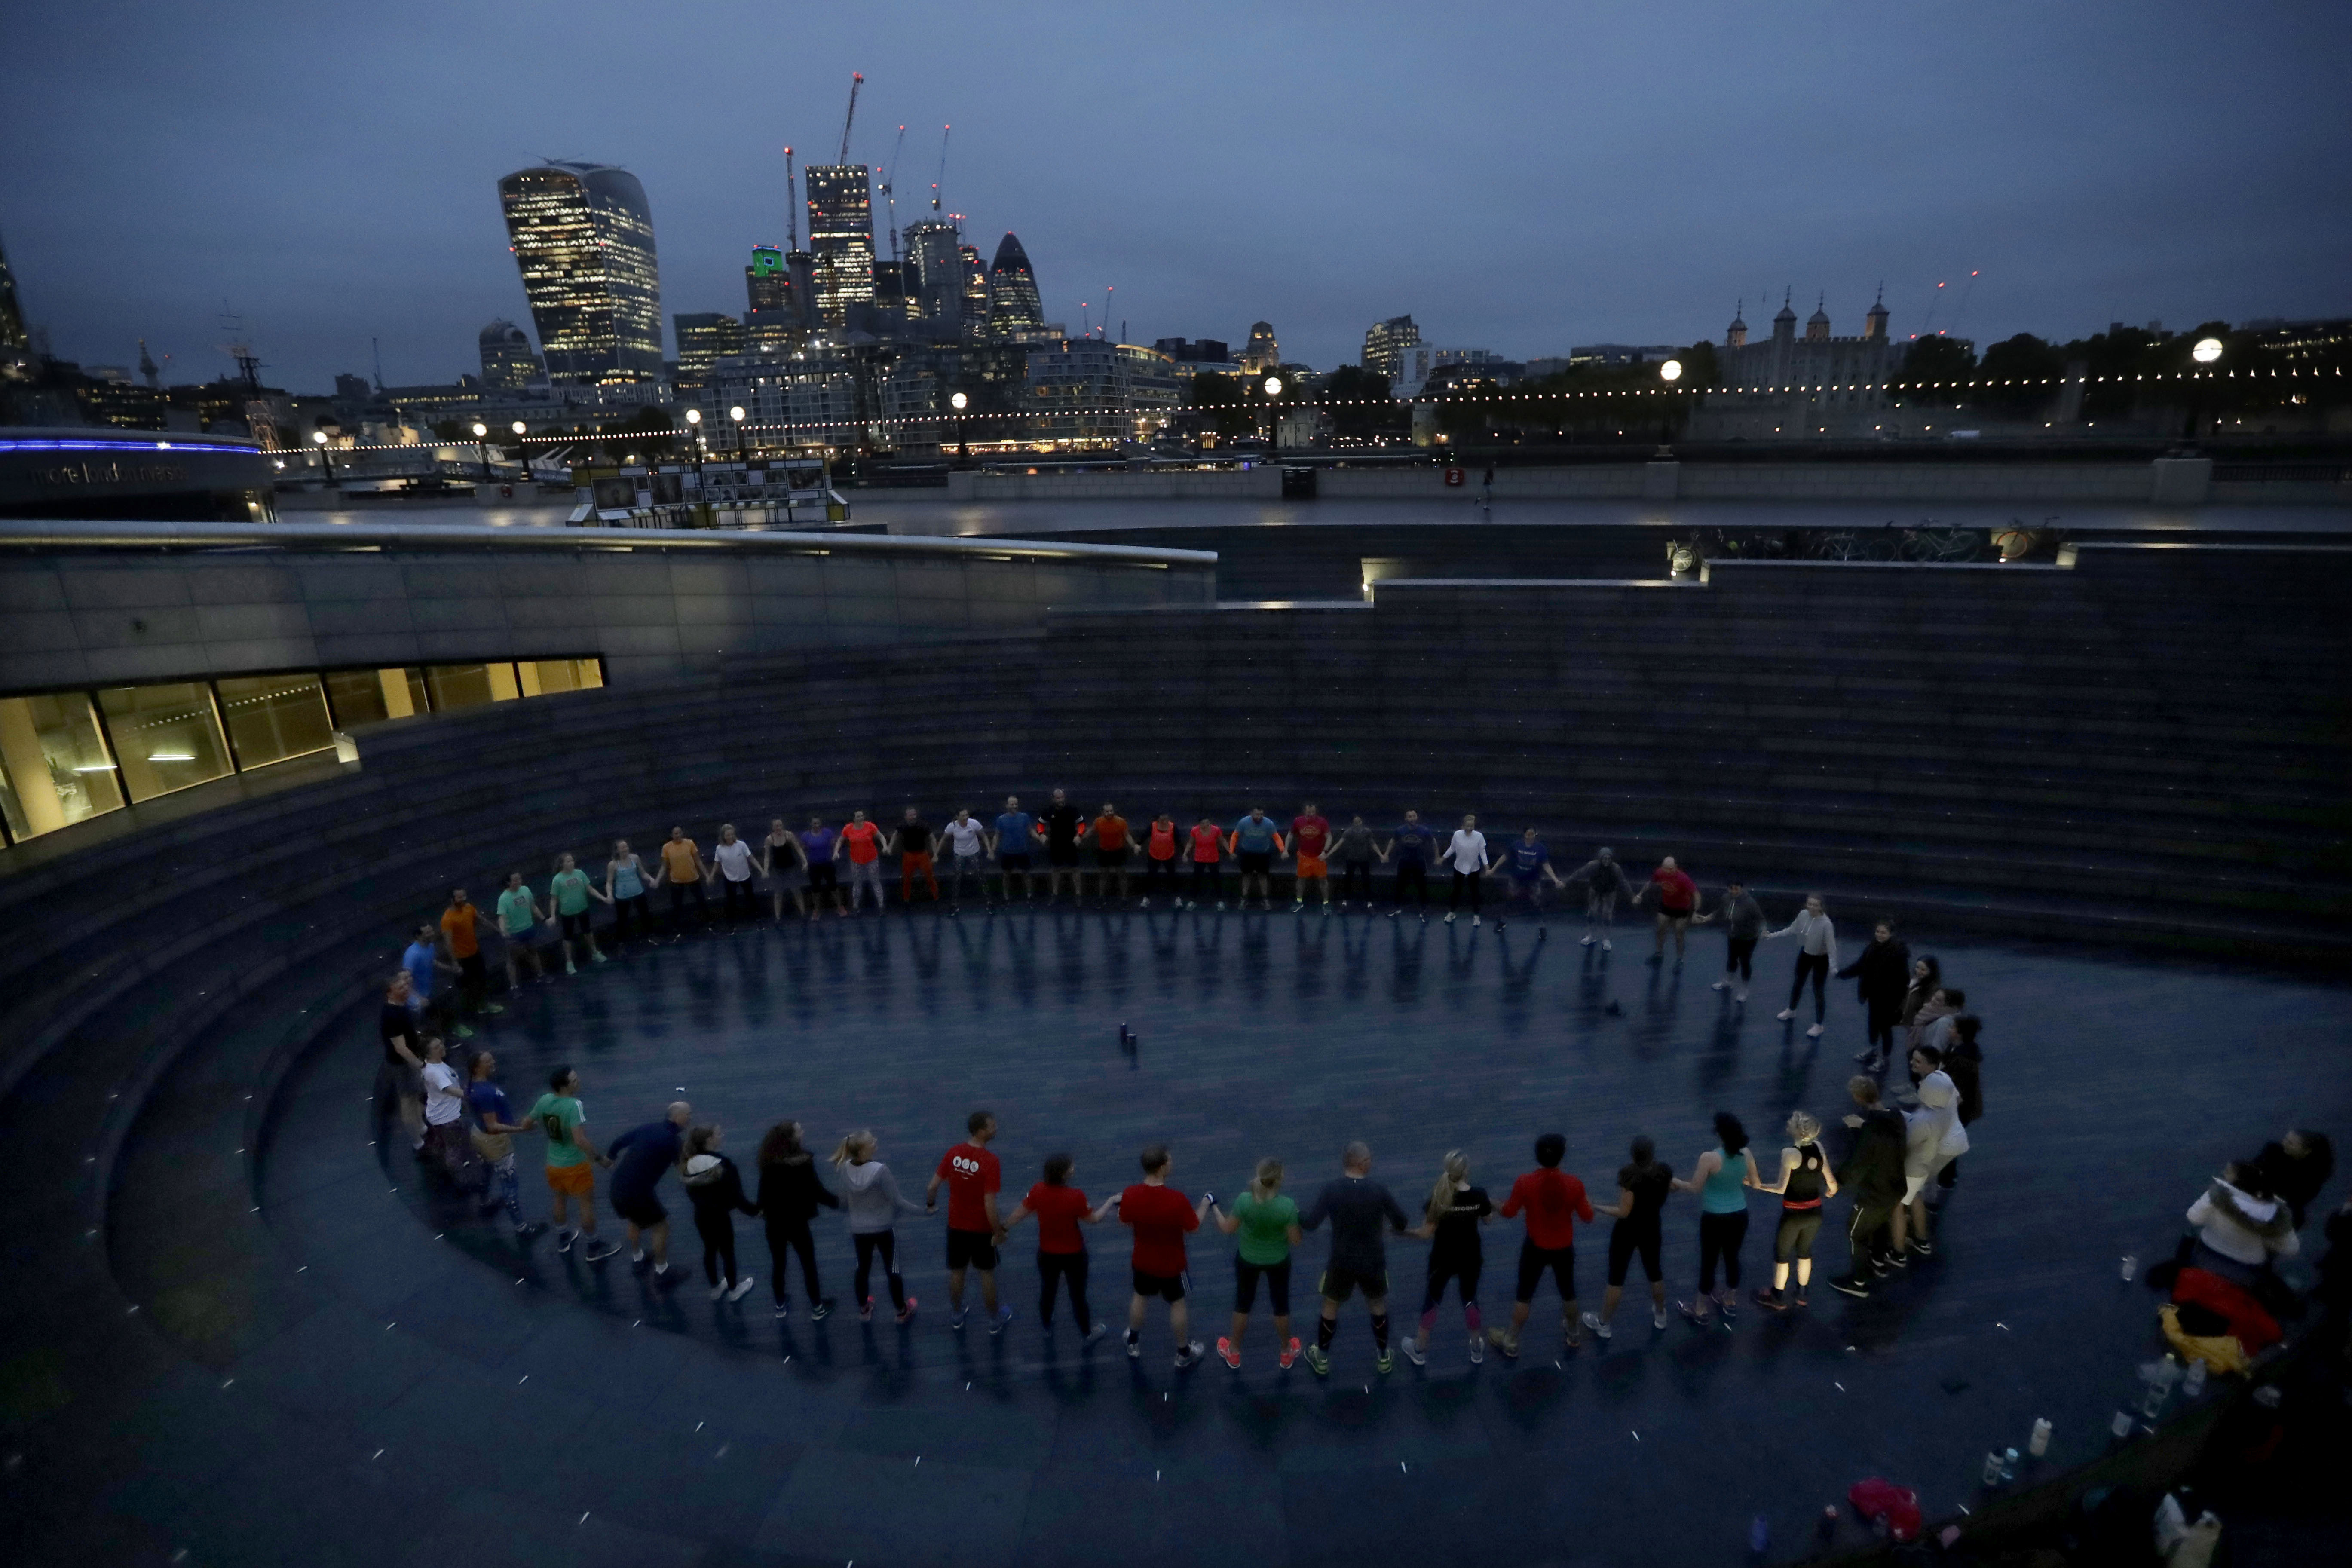 People take part in early morning exercise in 'the Scoop' an outdoor amphitheater near City Hall by the River Thames in London, Wednesday, Oct. 18, 2017. (AP Photo/Matt Dunham)